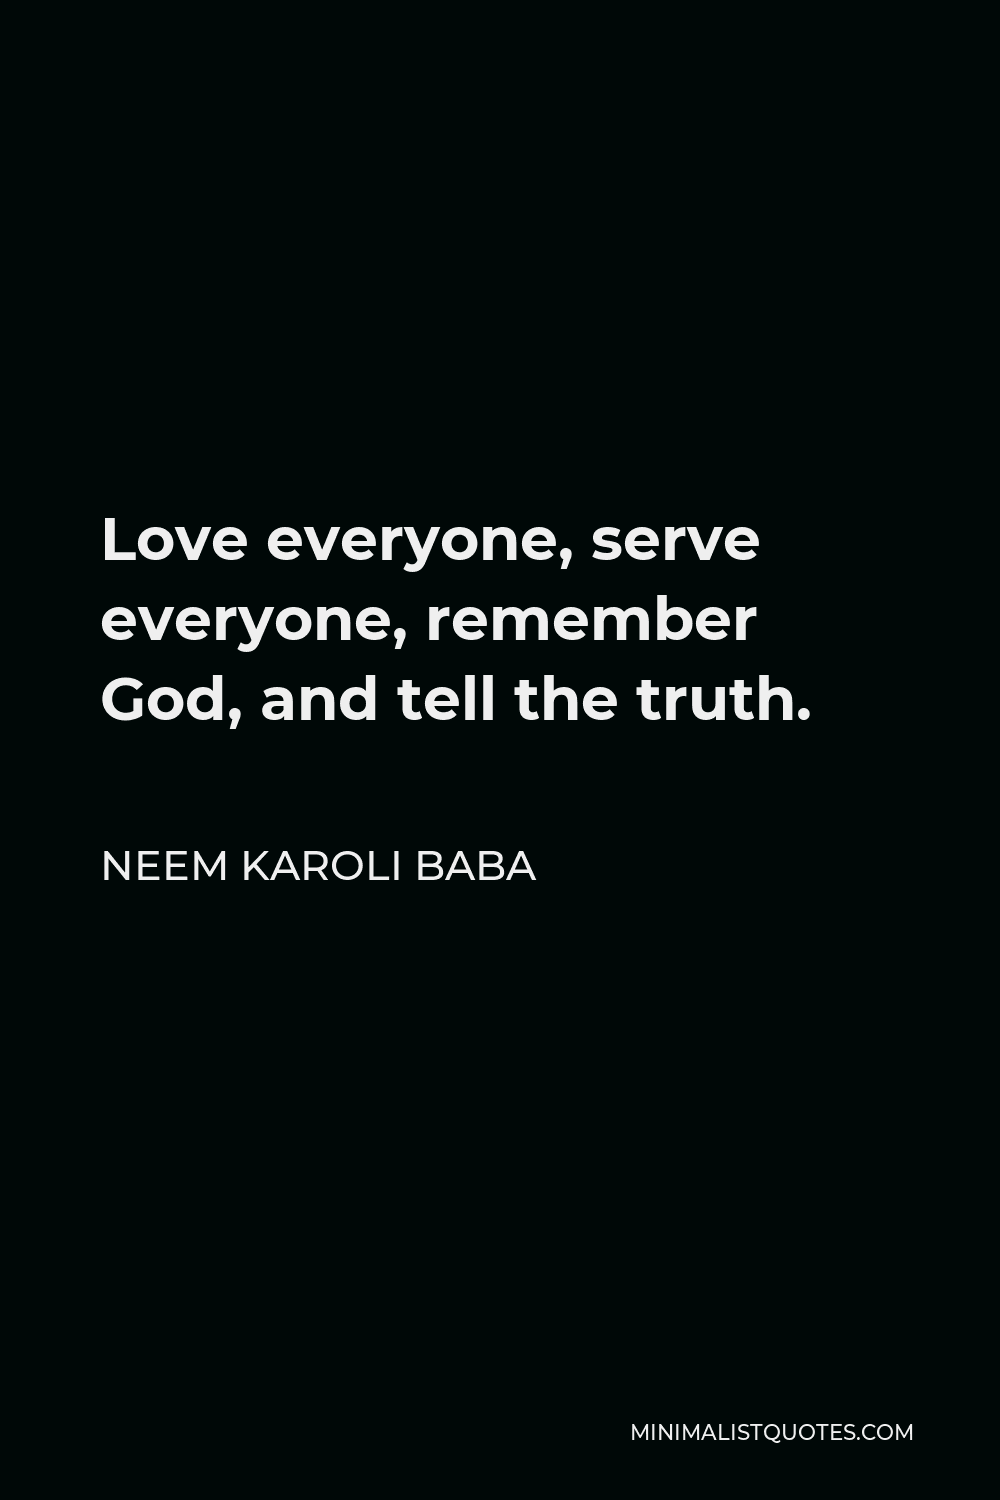 Neem Karoli Baba Quote - Love everyone, serve everyone, remember God, and tell the truth.